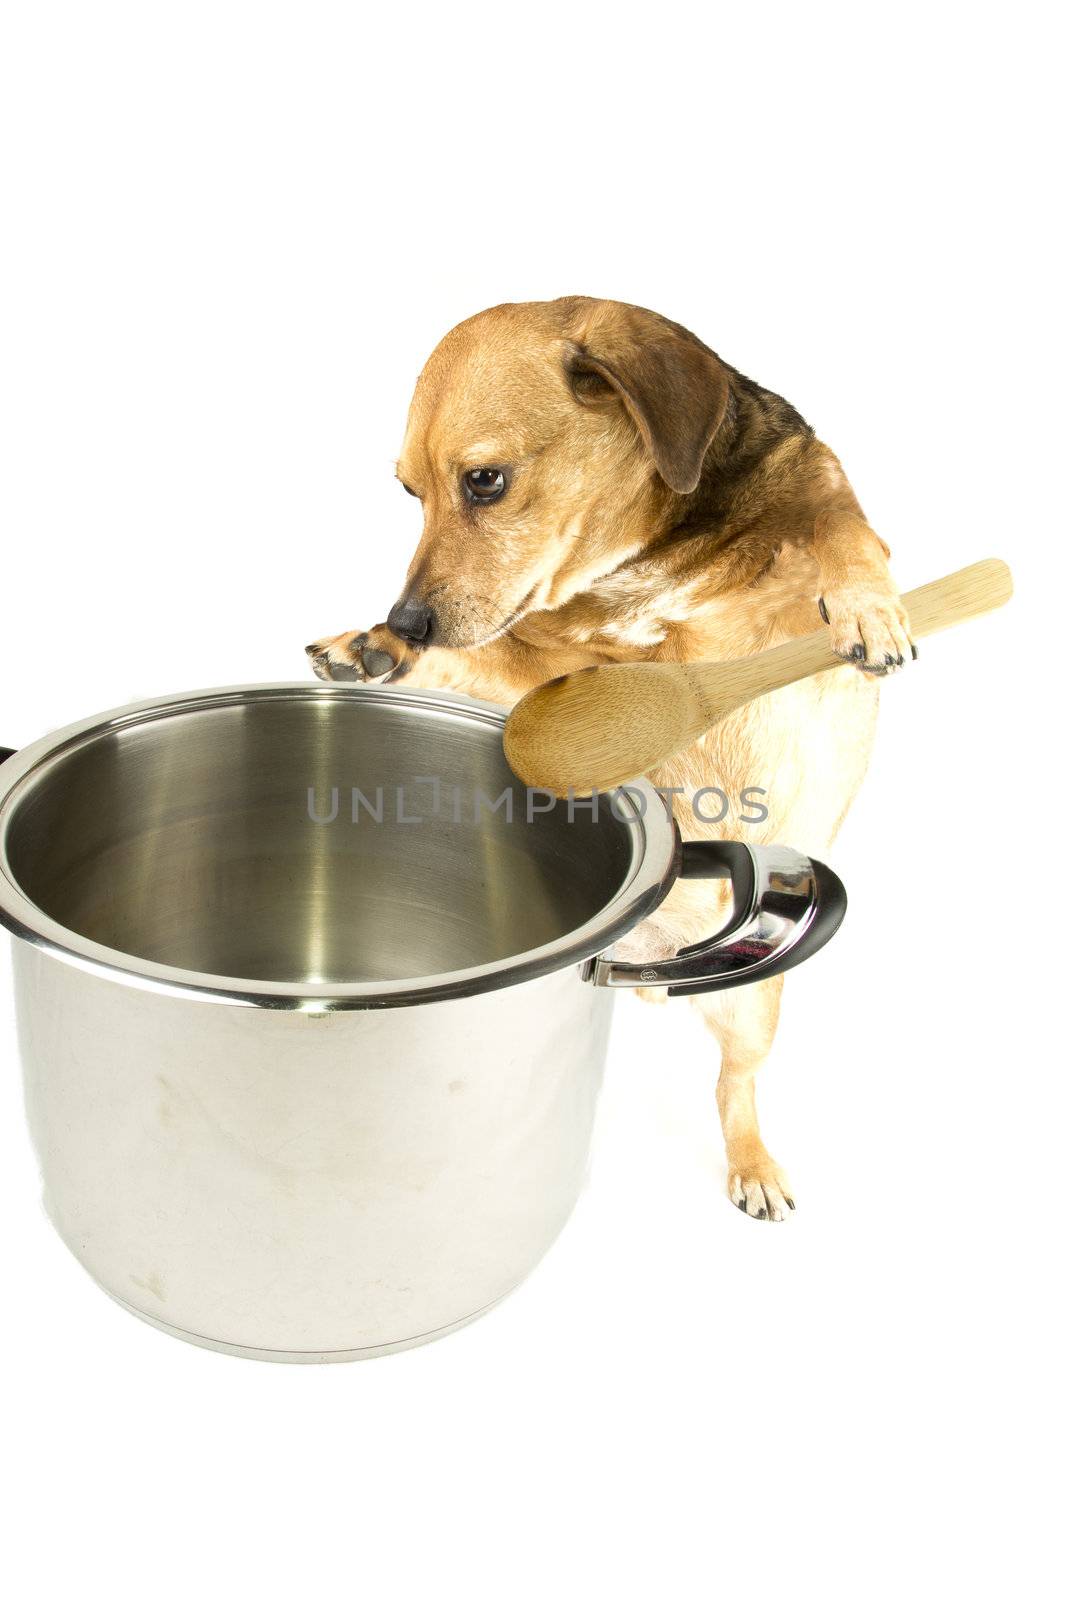 a hose dog cooking for masters